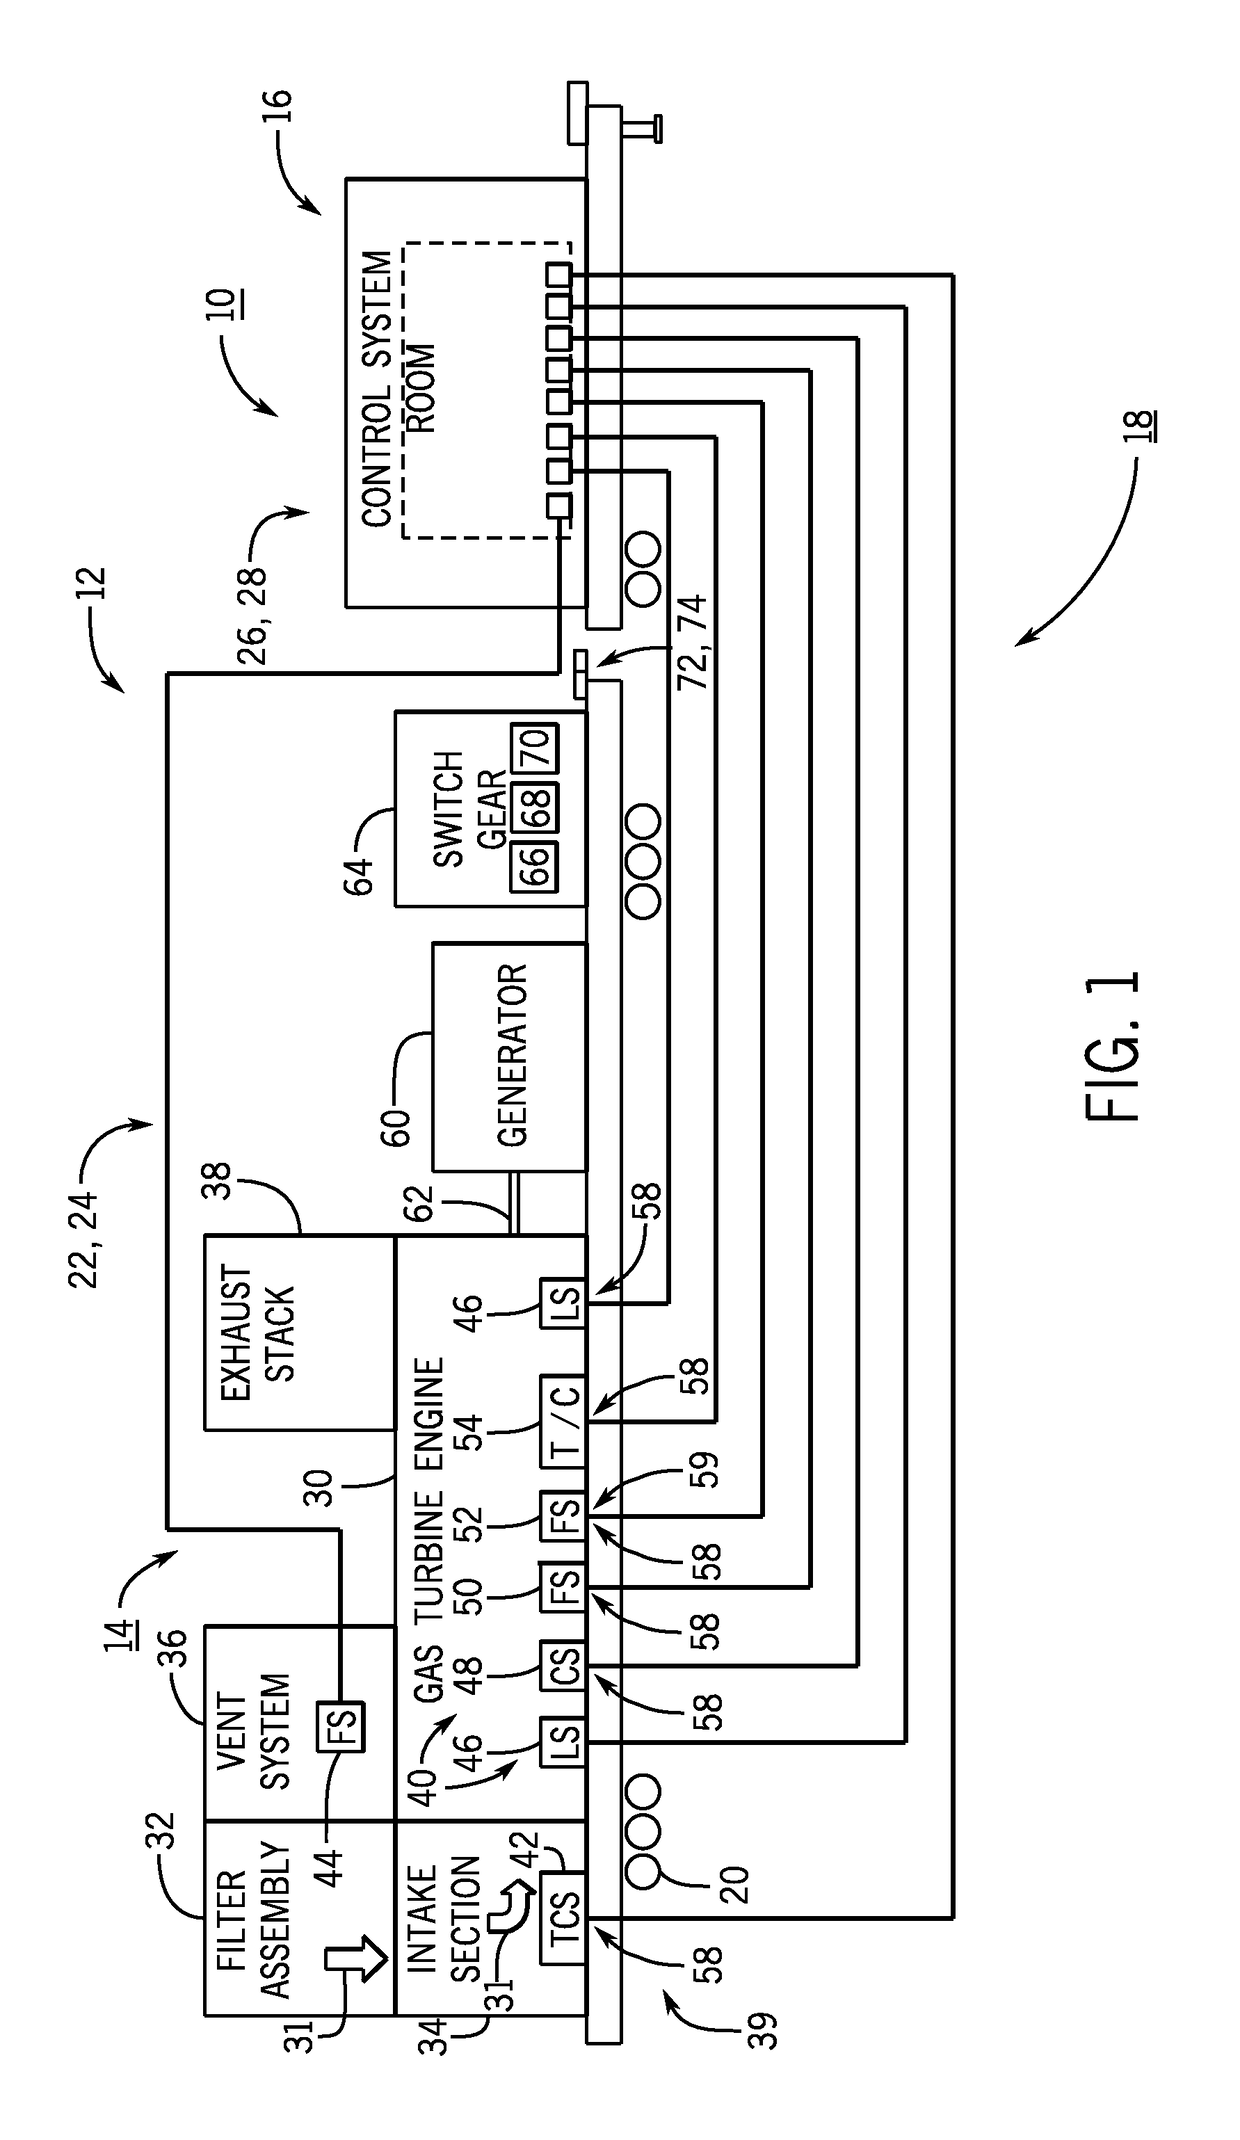 System and method for coupling components of a turbine system with cables